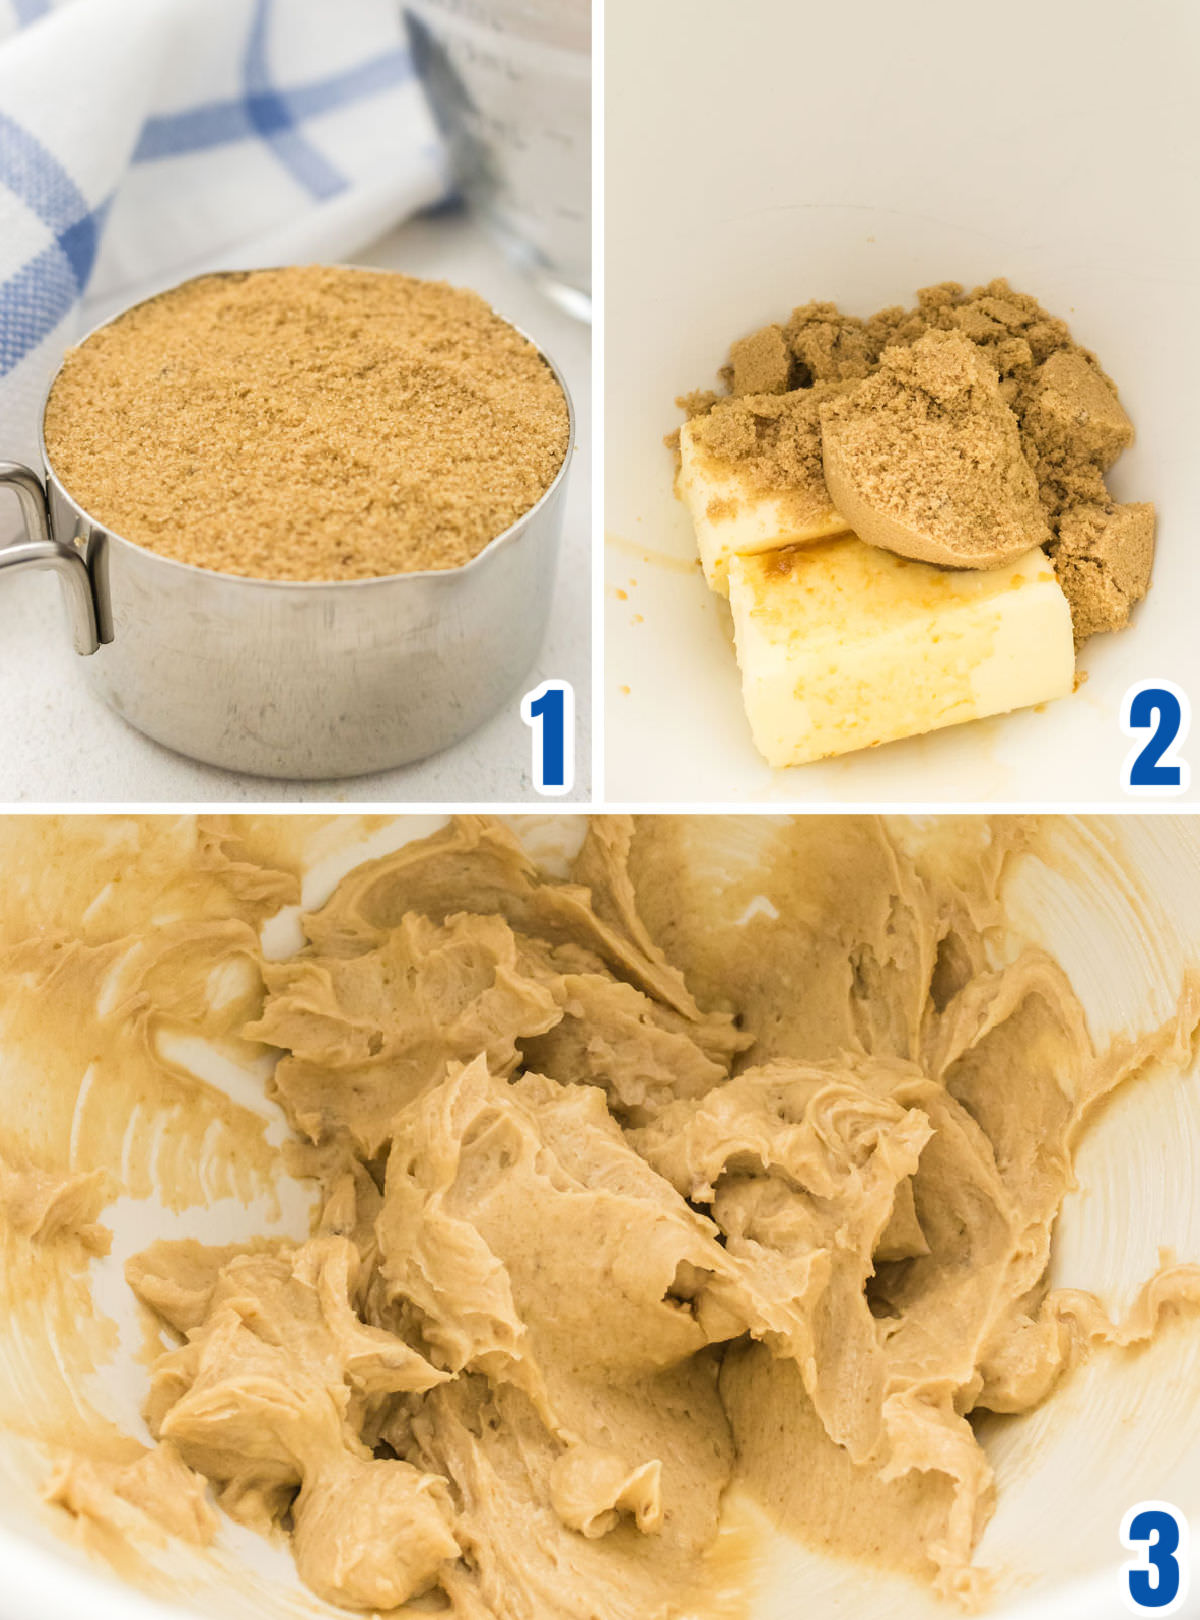 Collage image showing the steps for combining the butter, brown sugar and vanilla.